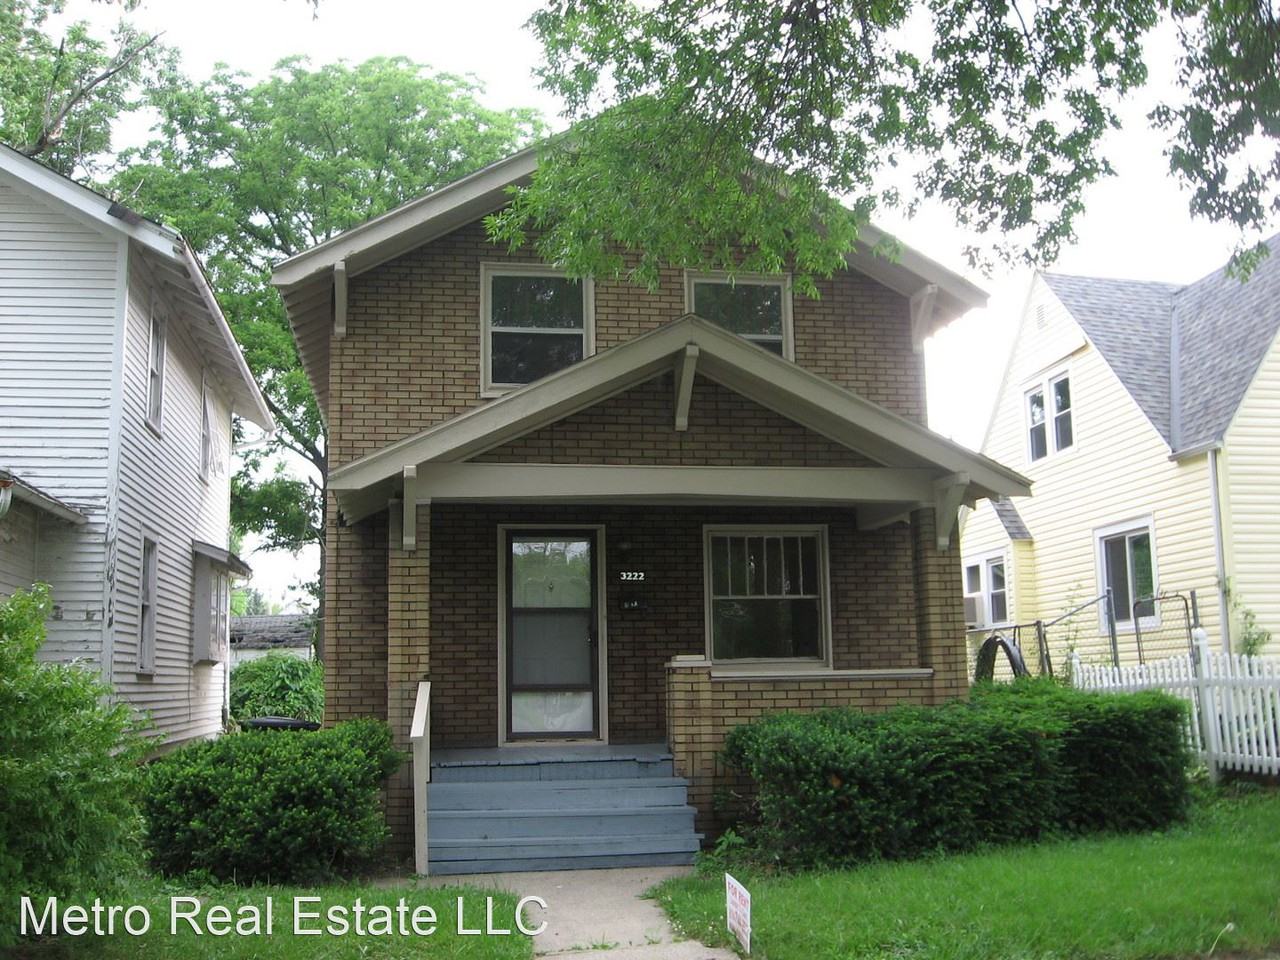 3222 Winter St, Fort Wayne, IN 46806 3 Bedroom House for Rent for $675